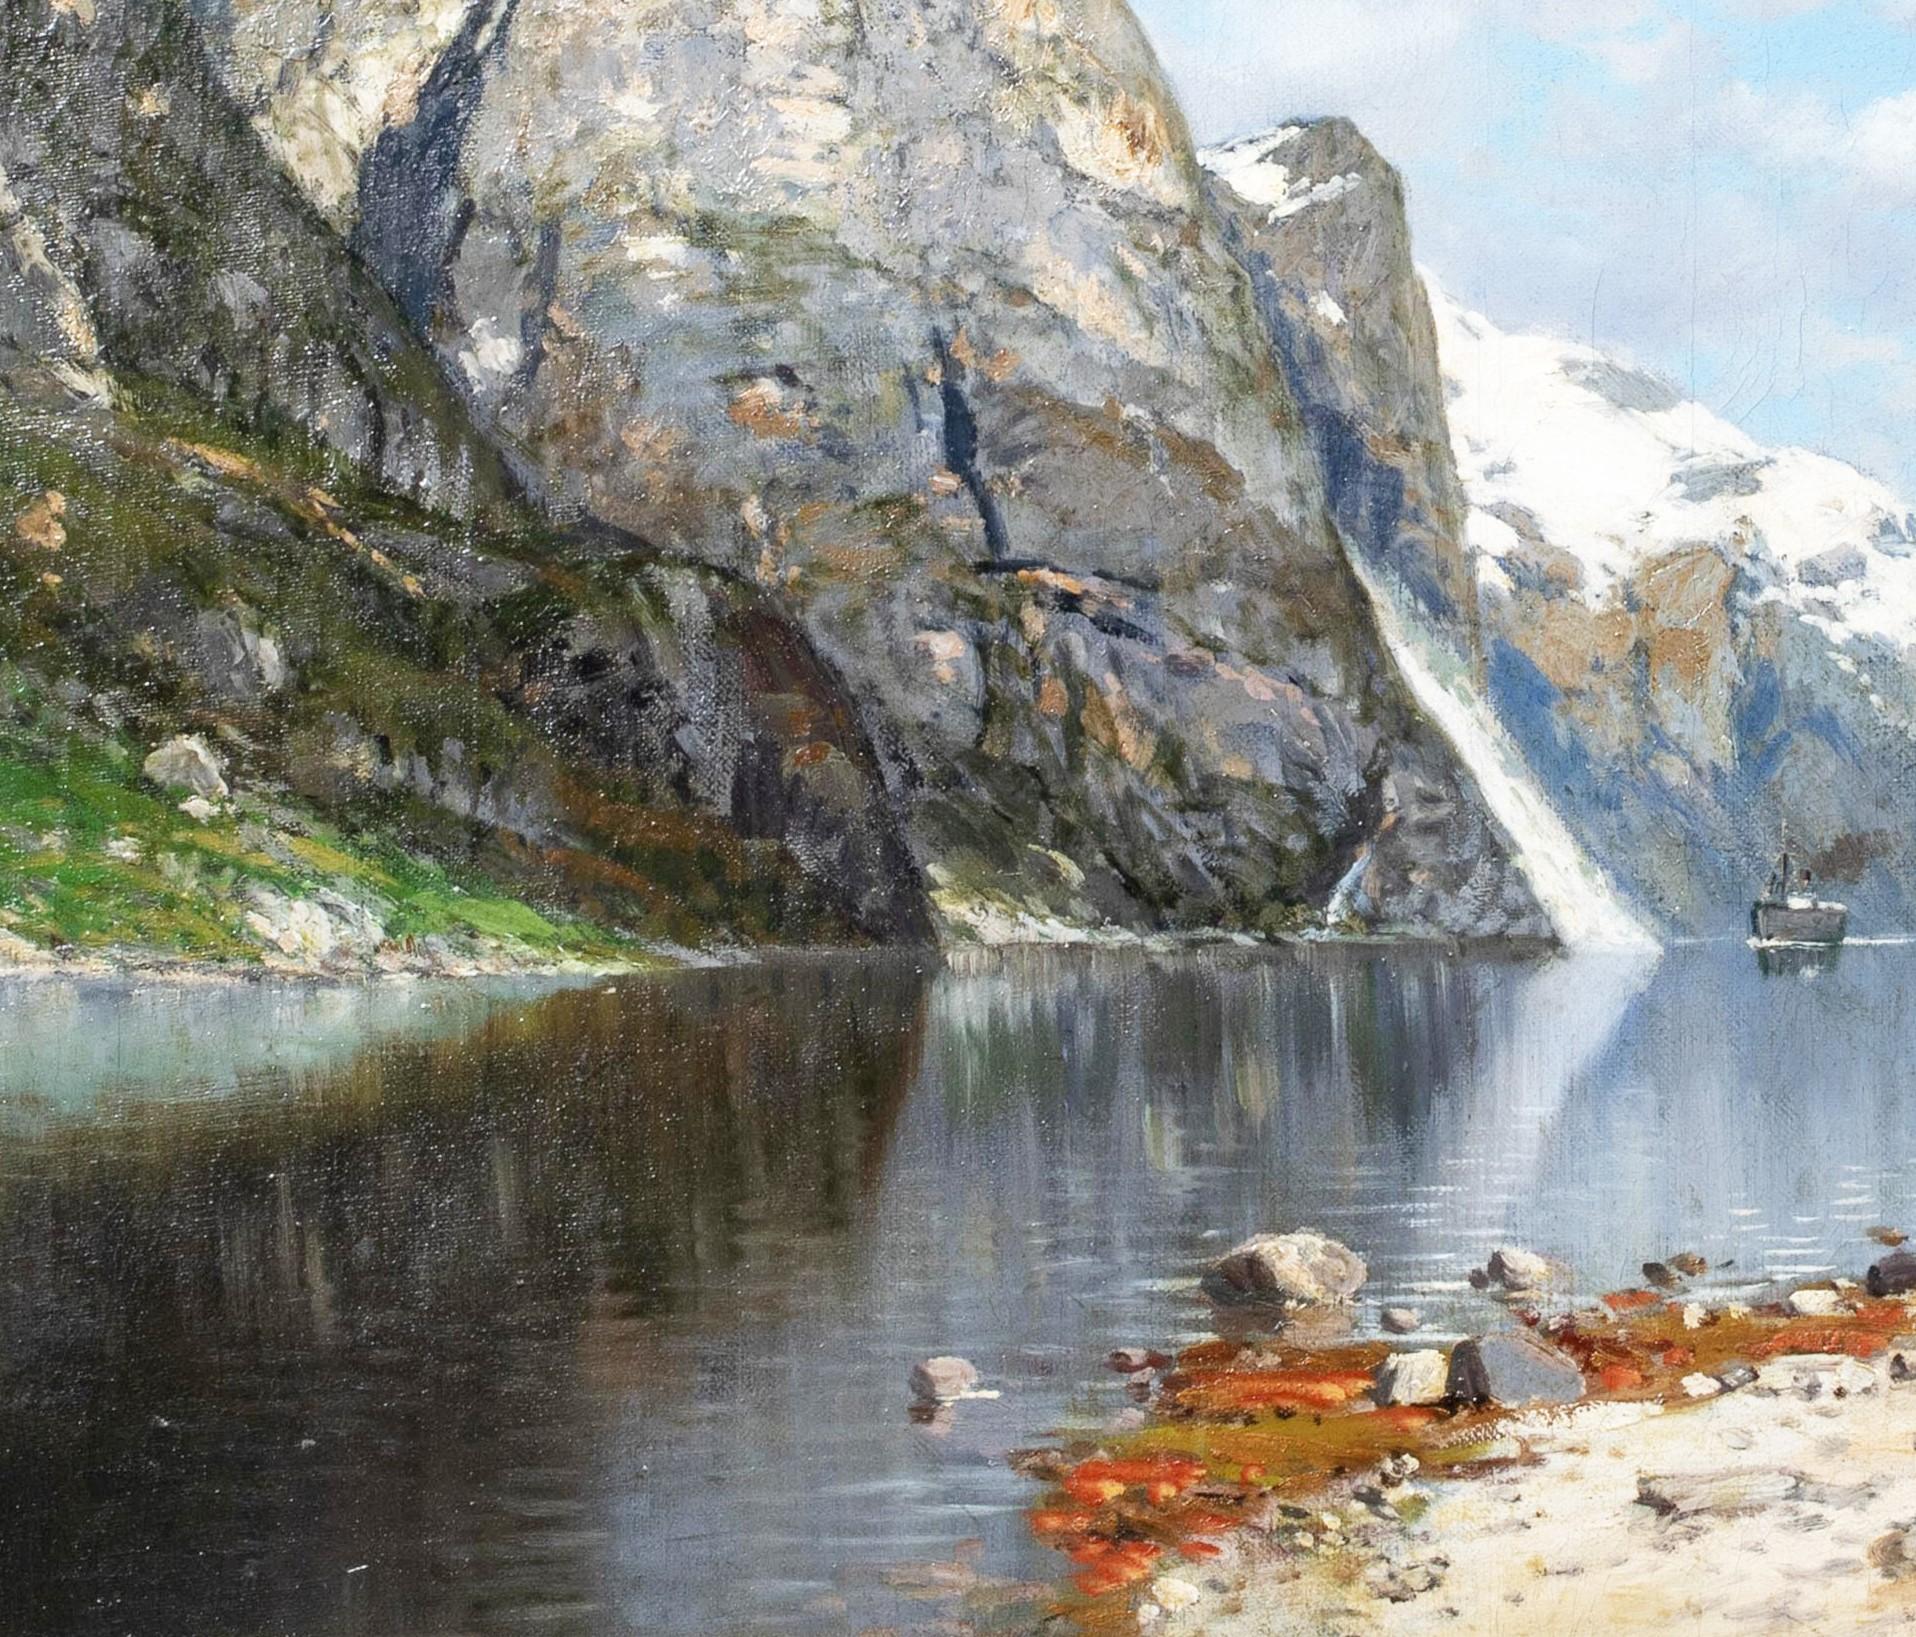 Norwegian Fjord Landscape, 19th century 

European School - signed indistinctly

Large 19th century European School view of a Norwegian Fjord, oil on canvas signed indistinctly. Excellent quality and condition work by an accomplished yet